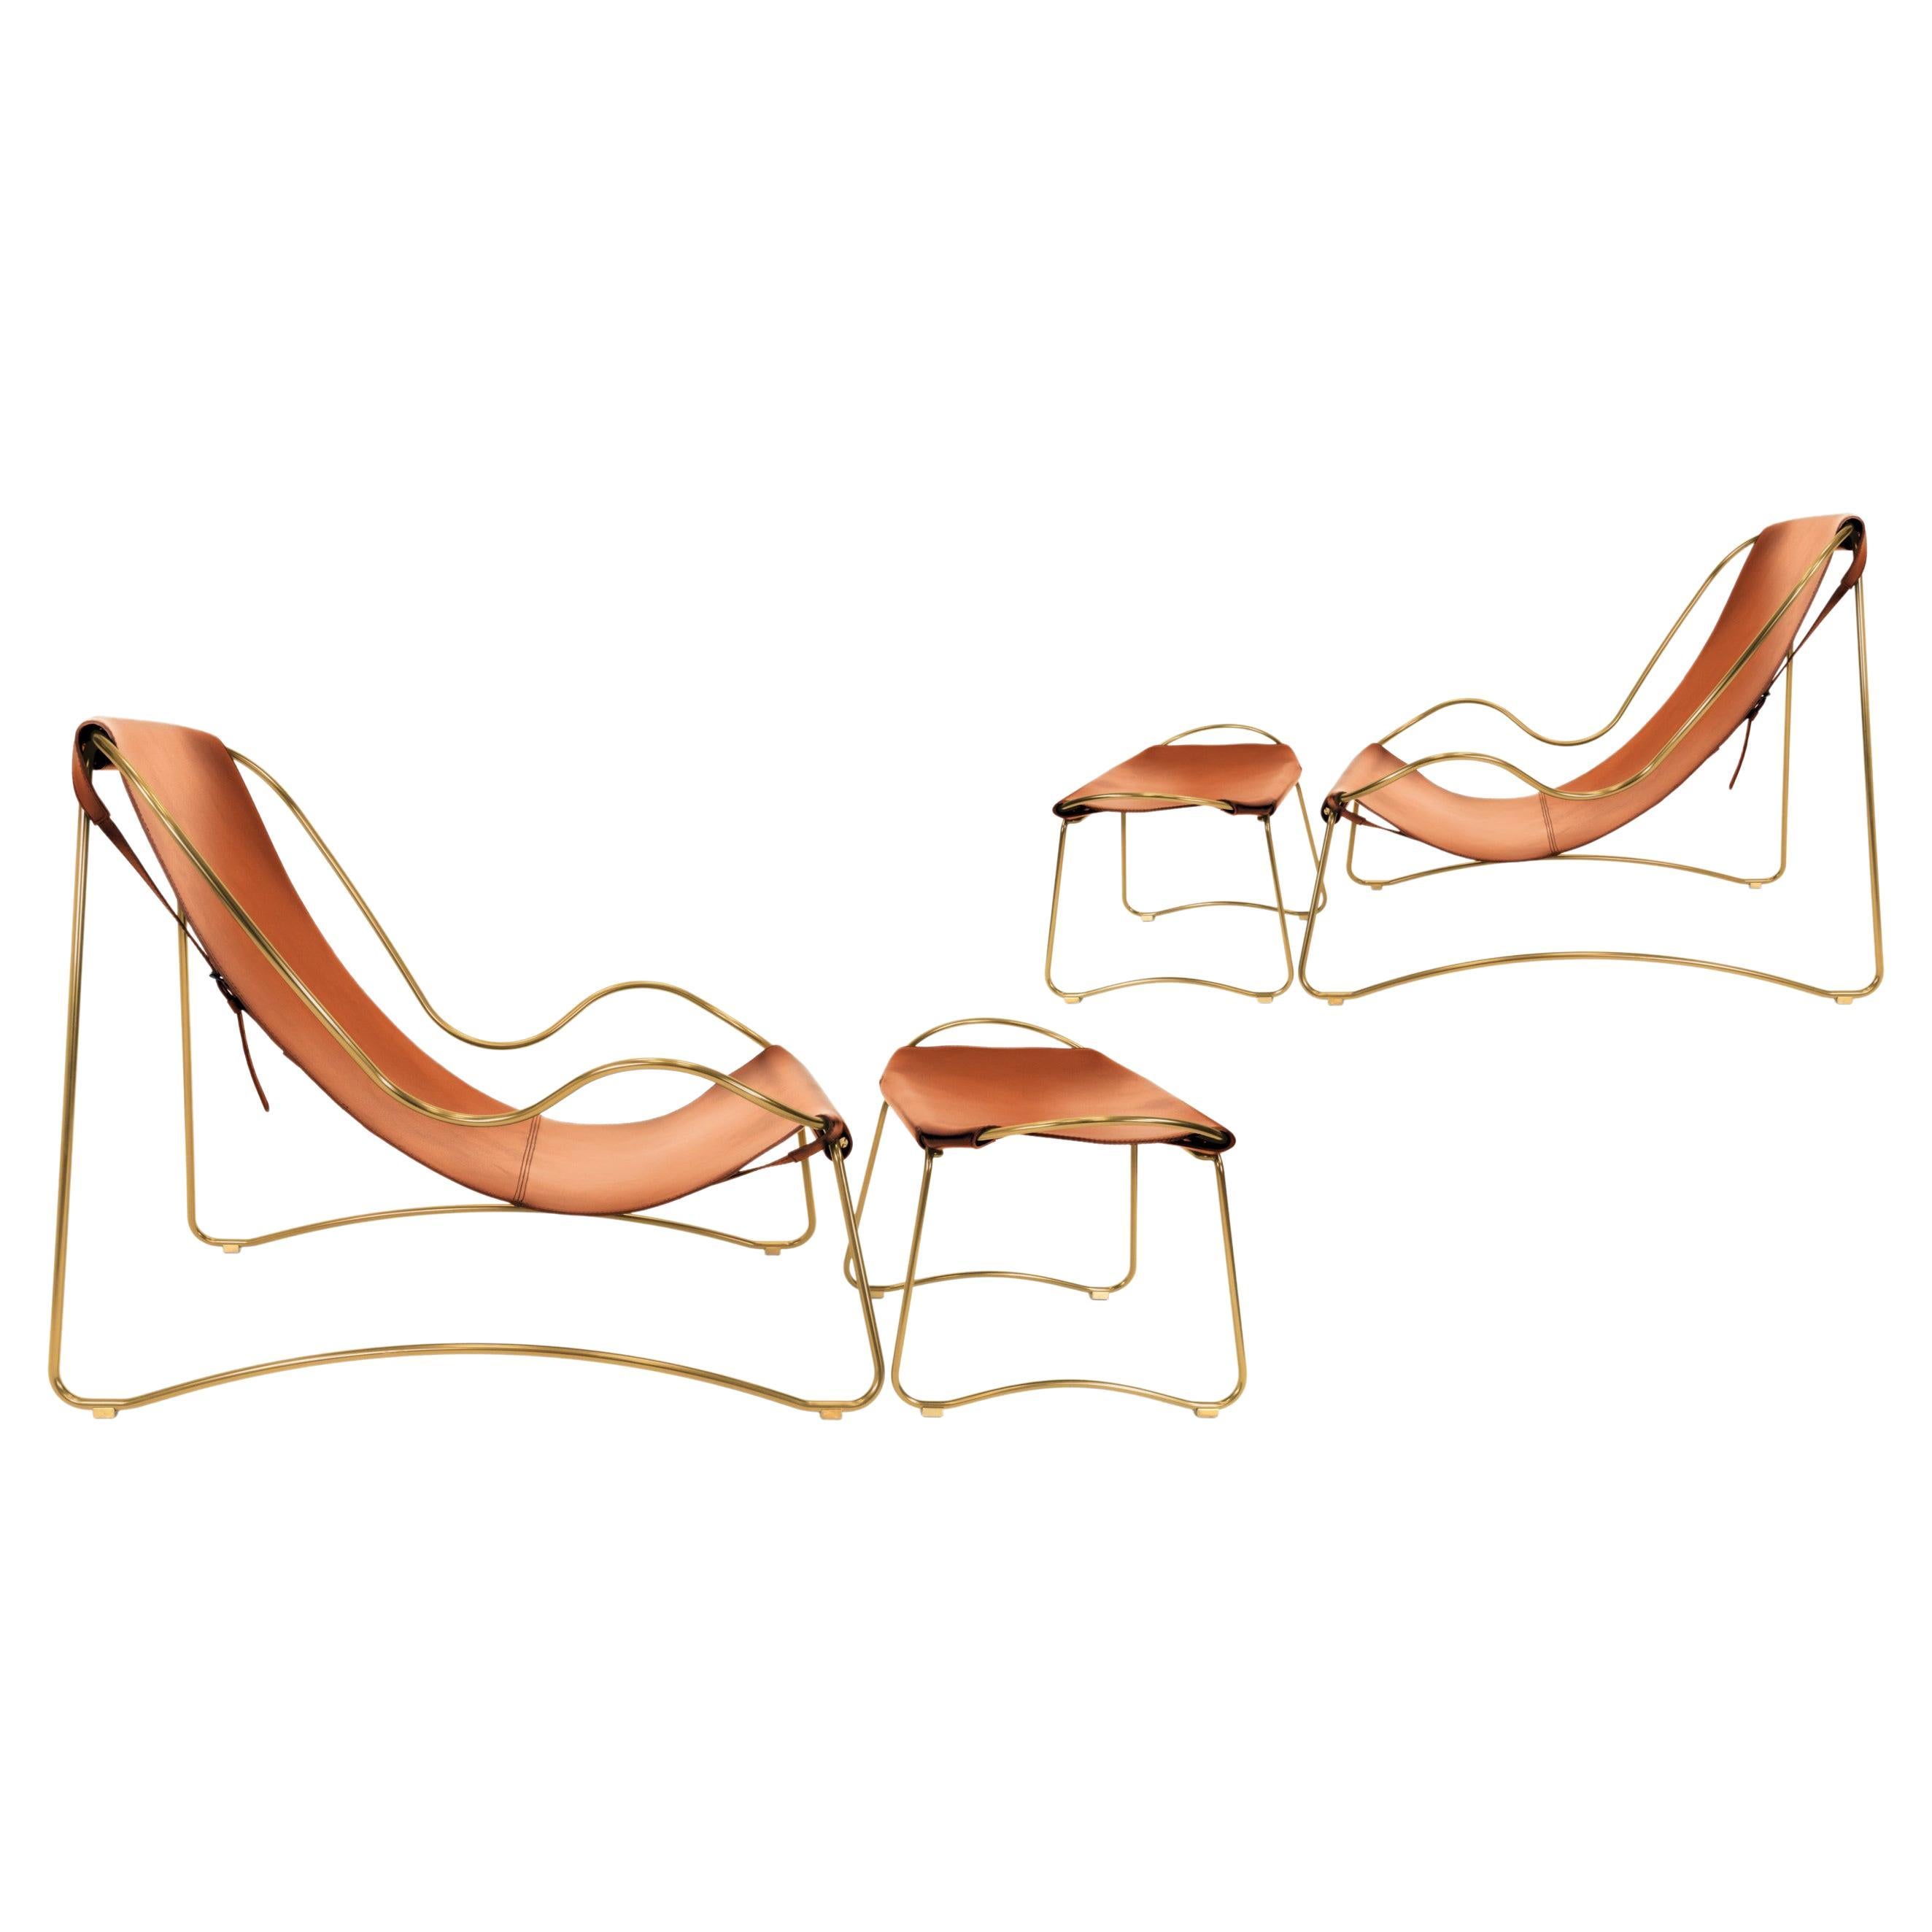 Pair Sculptural Chaise Lounge & Pouf Brass Aged Brass Metal, Natural Tan Leather For Sale